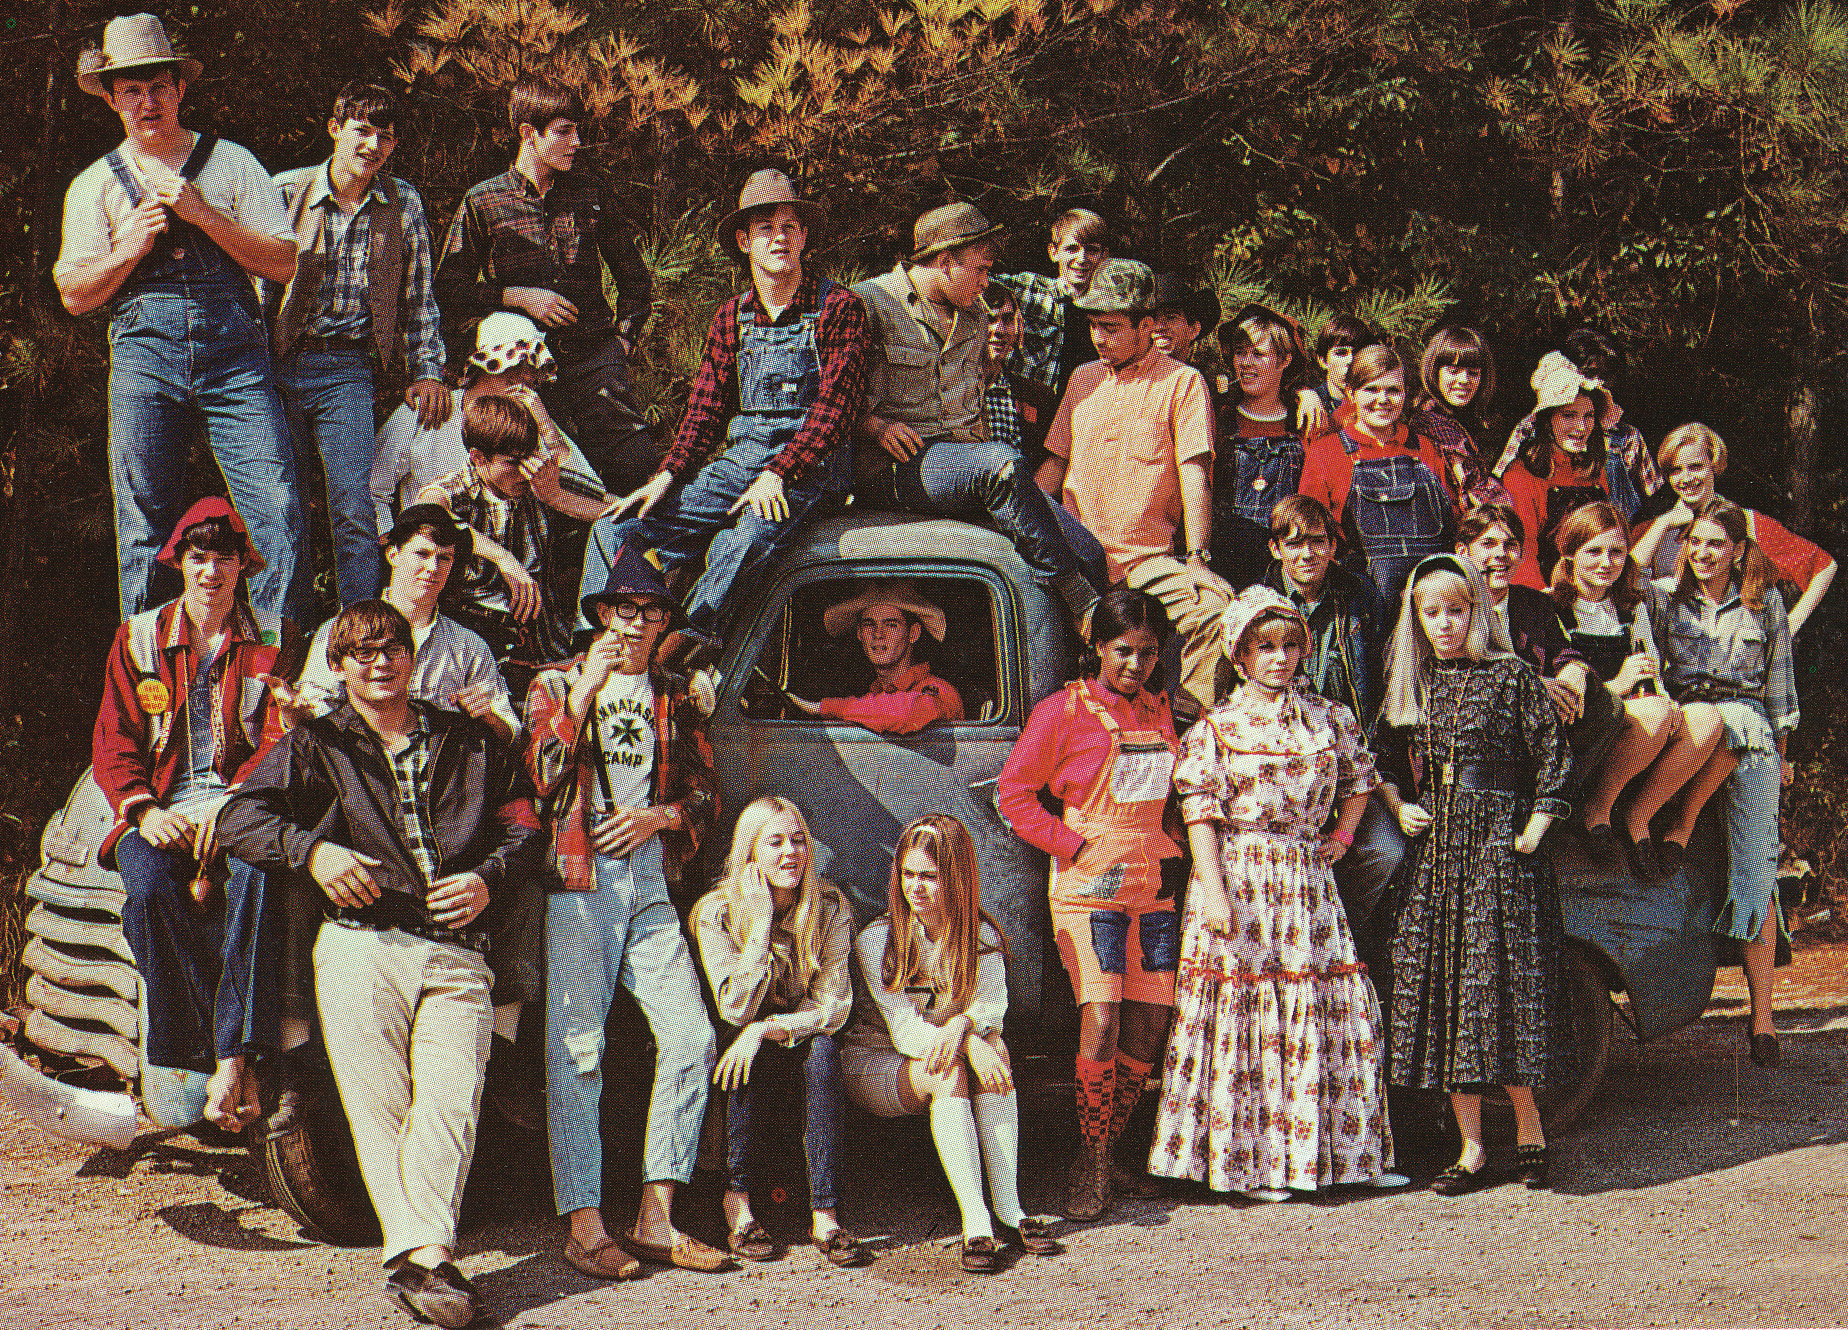 MOUNTIE DAY AT SHADES VALLEY WAS OUR HOMECOMING. CAN YOU BELIEVE THEY CALLED US REDNECKS?(Click to enlarge.)